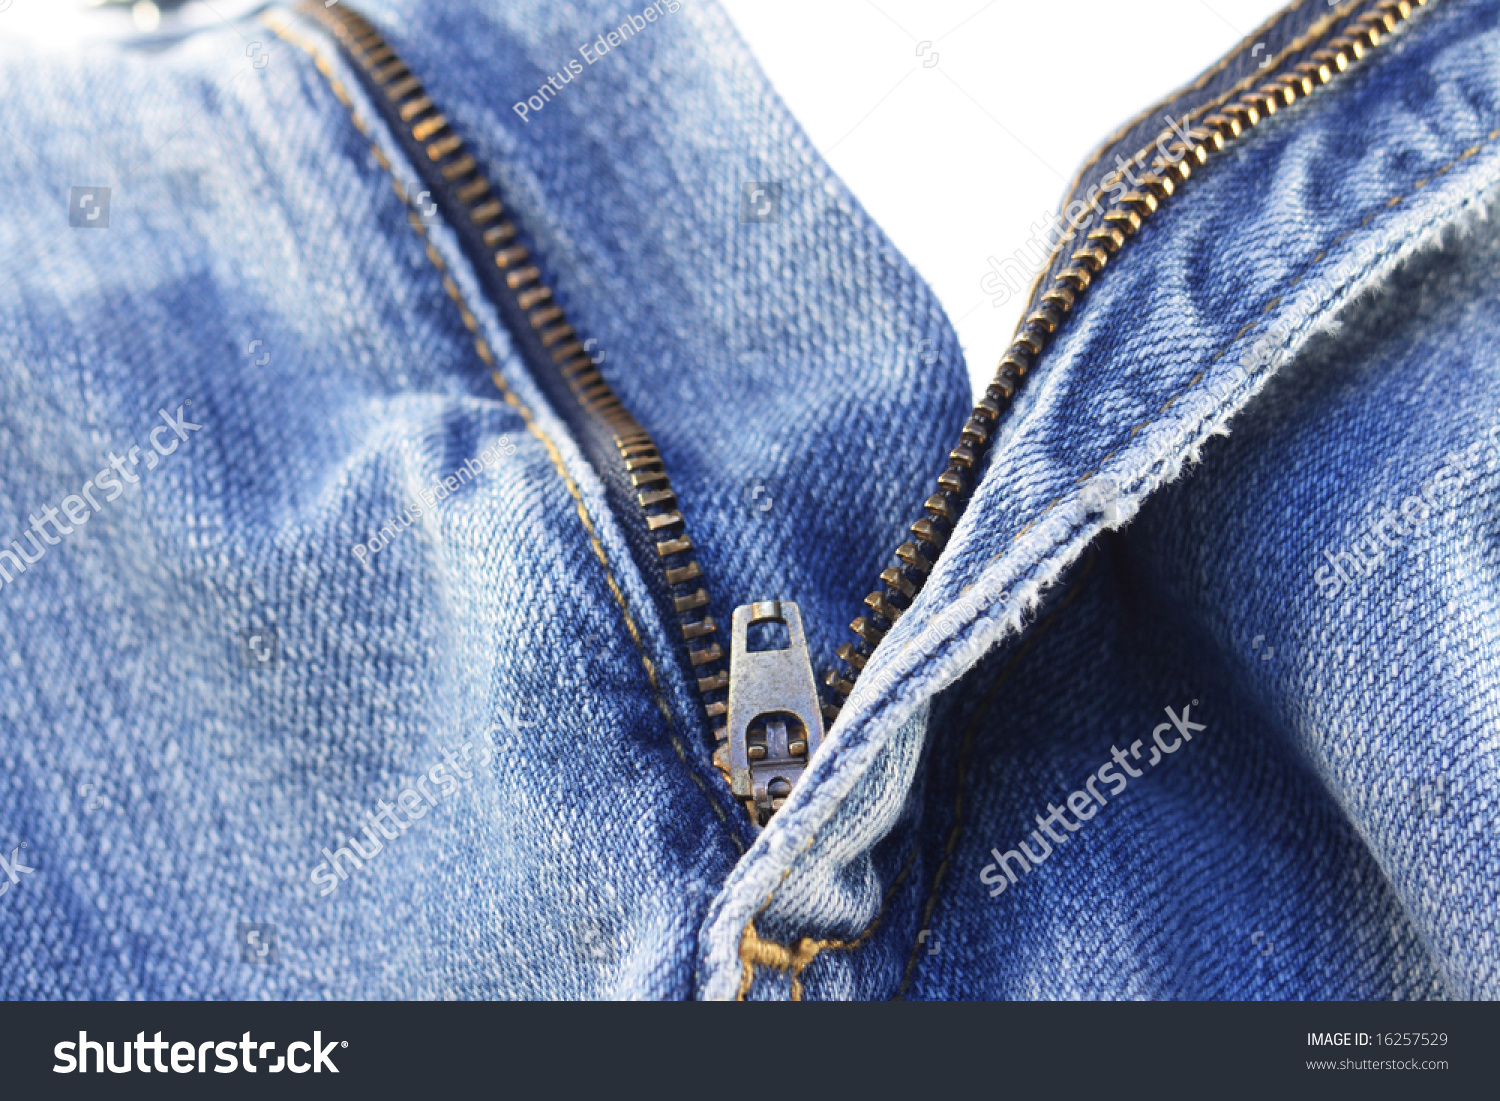 Pair Of Jeans With Zipper In Close-Up Stock Photo 16257529 : Shutterstock